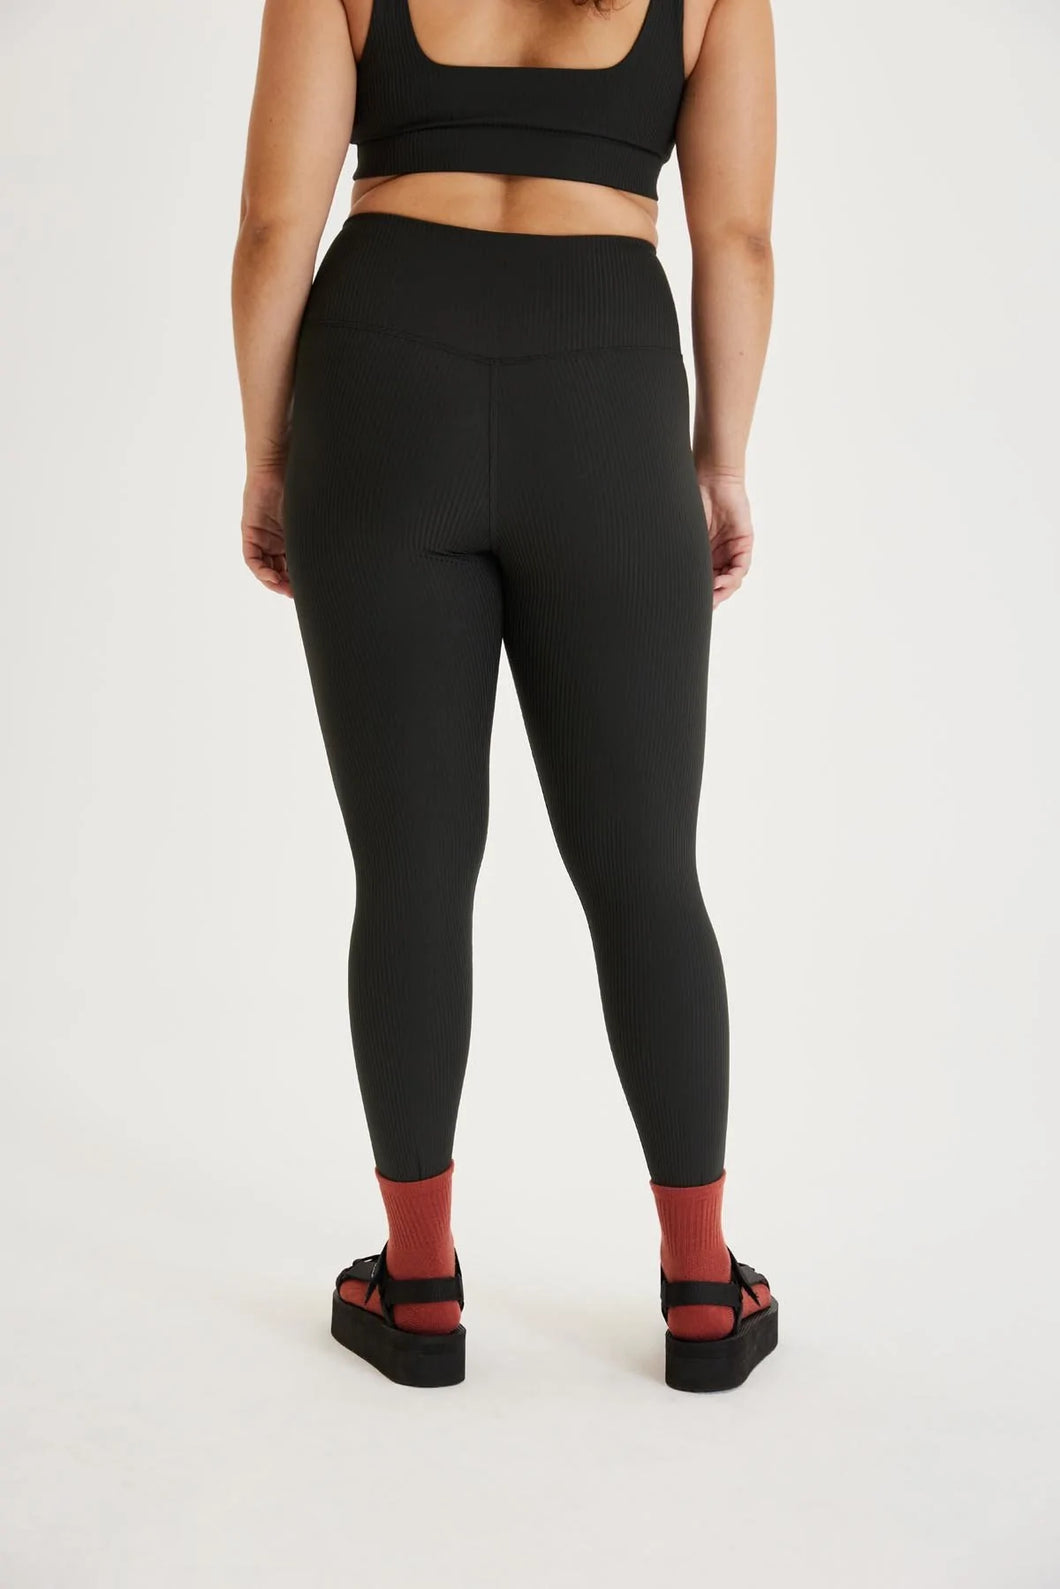 Rib High-Rise Legging by Girlfriend Collective